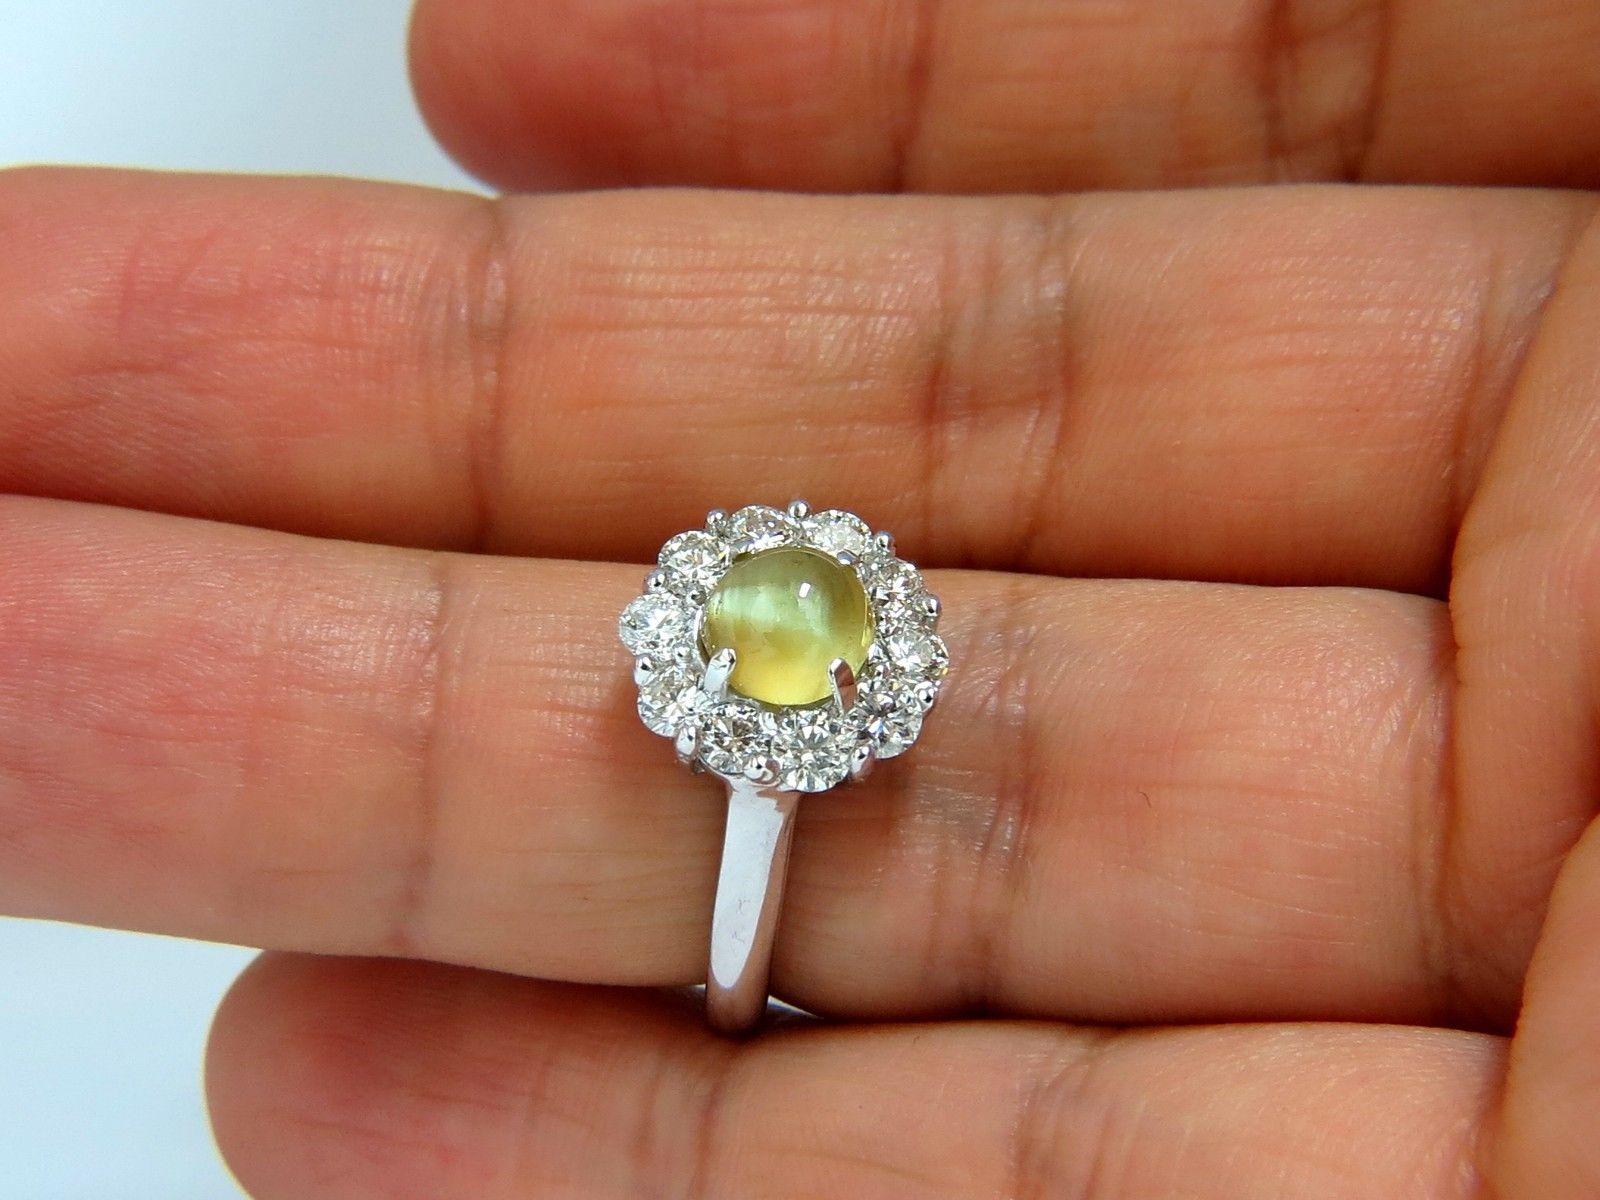 1.80ct. Natural Chrysoberyl (Cats Eye) & 1.15ct. diamonds ring.

Round Cabochon, Excellent VS Clean Clarity

Brilliant Vivid Bright Yellowish Green backround and good 